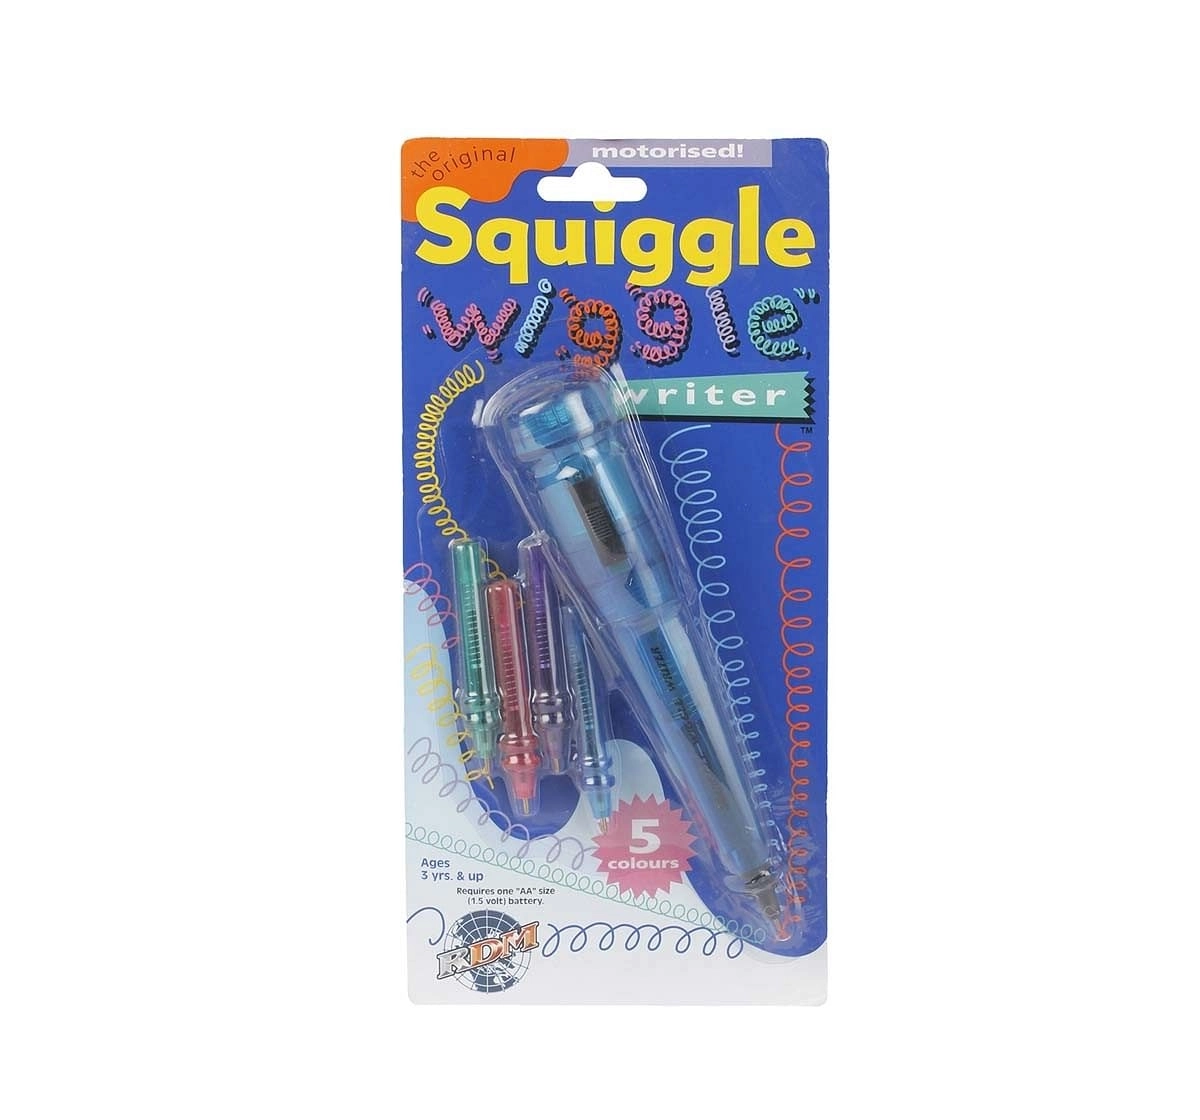 Hamleys Squiggle Wiggle Pen School Stationary for Kids age 3Y+ 